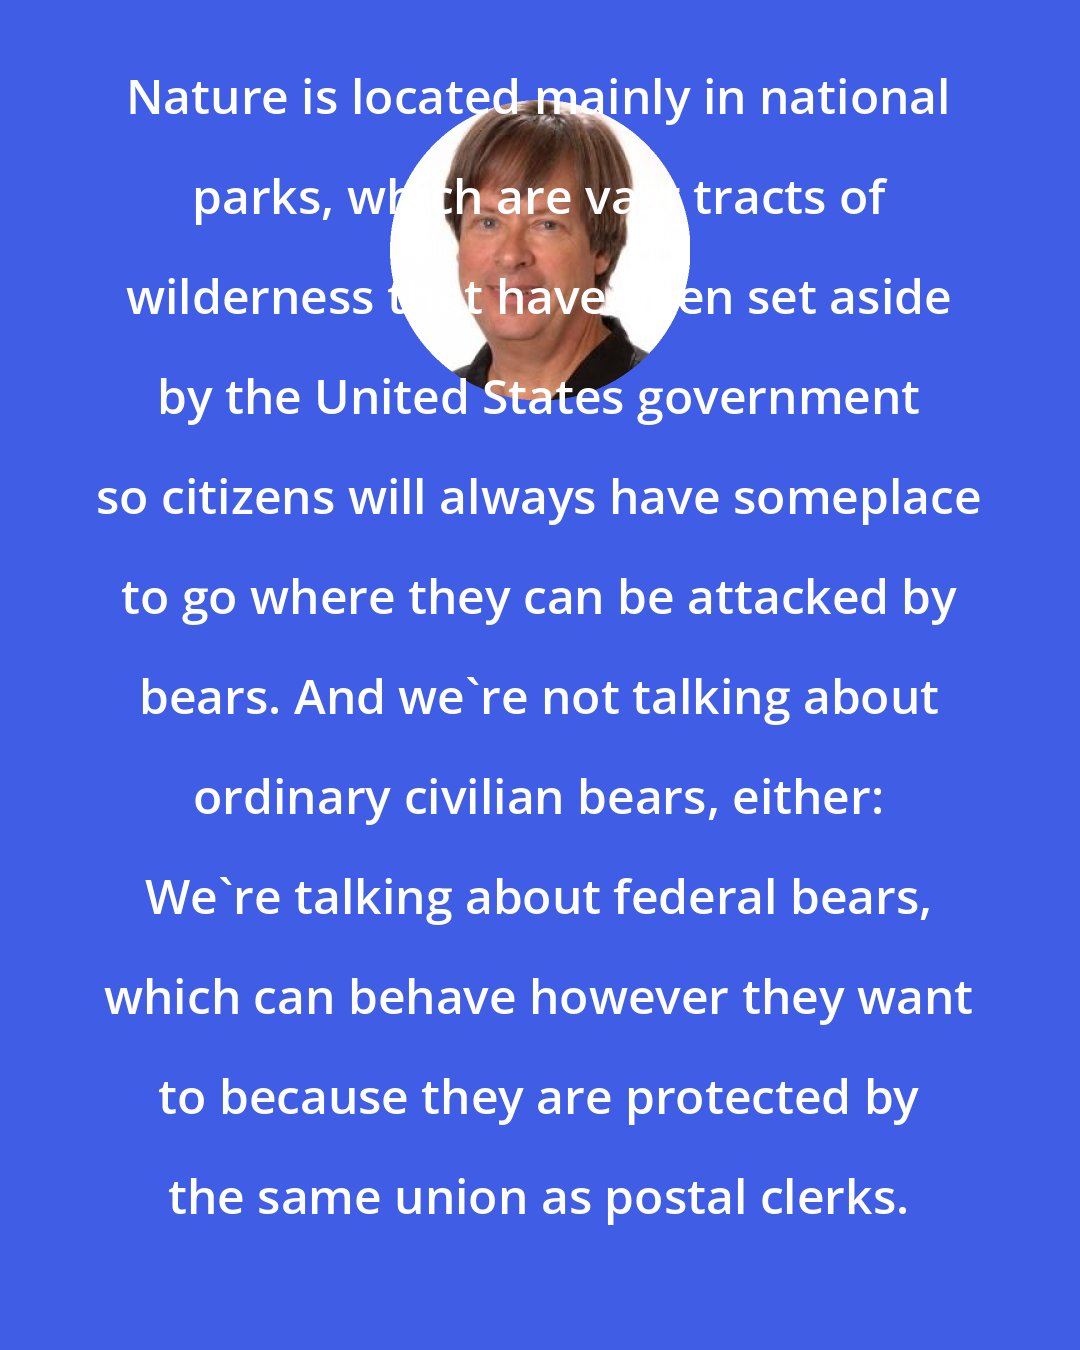 Dave Barry: Nature is located mainly in national parks, which are vast tracts of wilderness that have been set aside by the United States government so citizens will always have someplace to go where they can be attacked by bears. And we're not talking about ordinary civilian bears, either: We're talking about federal bears, which can behave however they want to because they are protected by the same union as postal clerks.